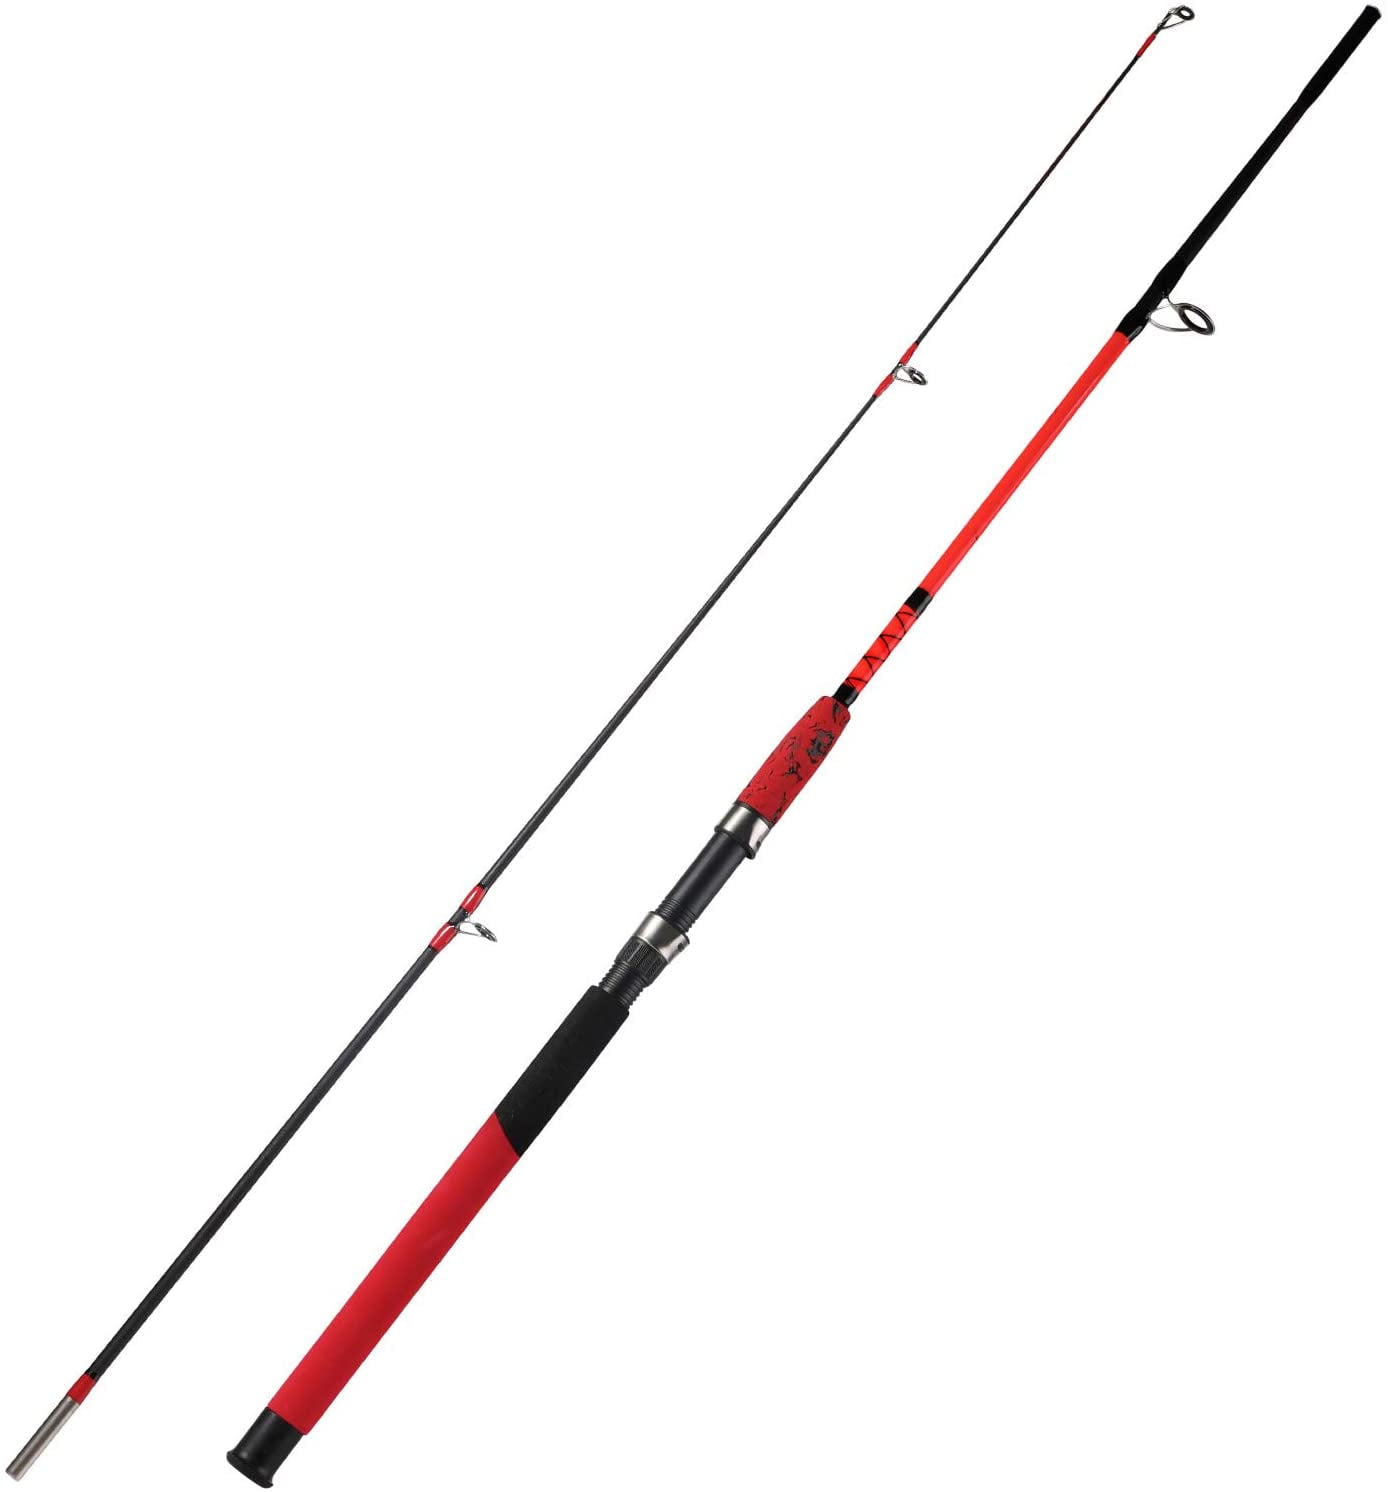 Sougayilang Cheap Fishing Rod 2.7-6.3m Single Fishing Rod Has Various  Lengths Suitable For Fishing Outdoor Sports - sotib olish Sougayilang Cheap  Fishing Rod 2.7-6.3m Single Fishing Rod Has Various Lengths Suitable For